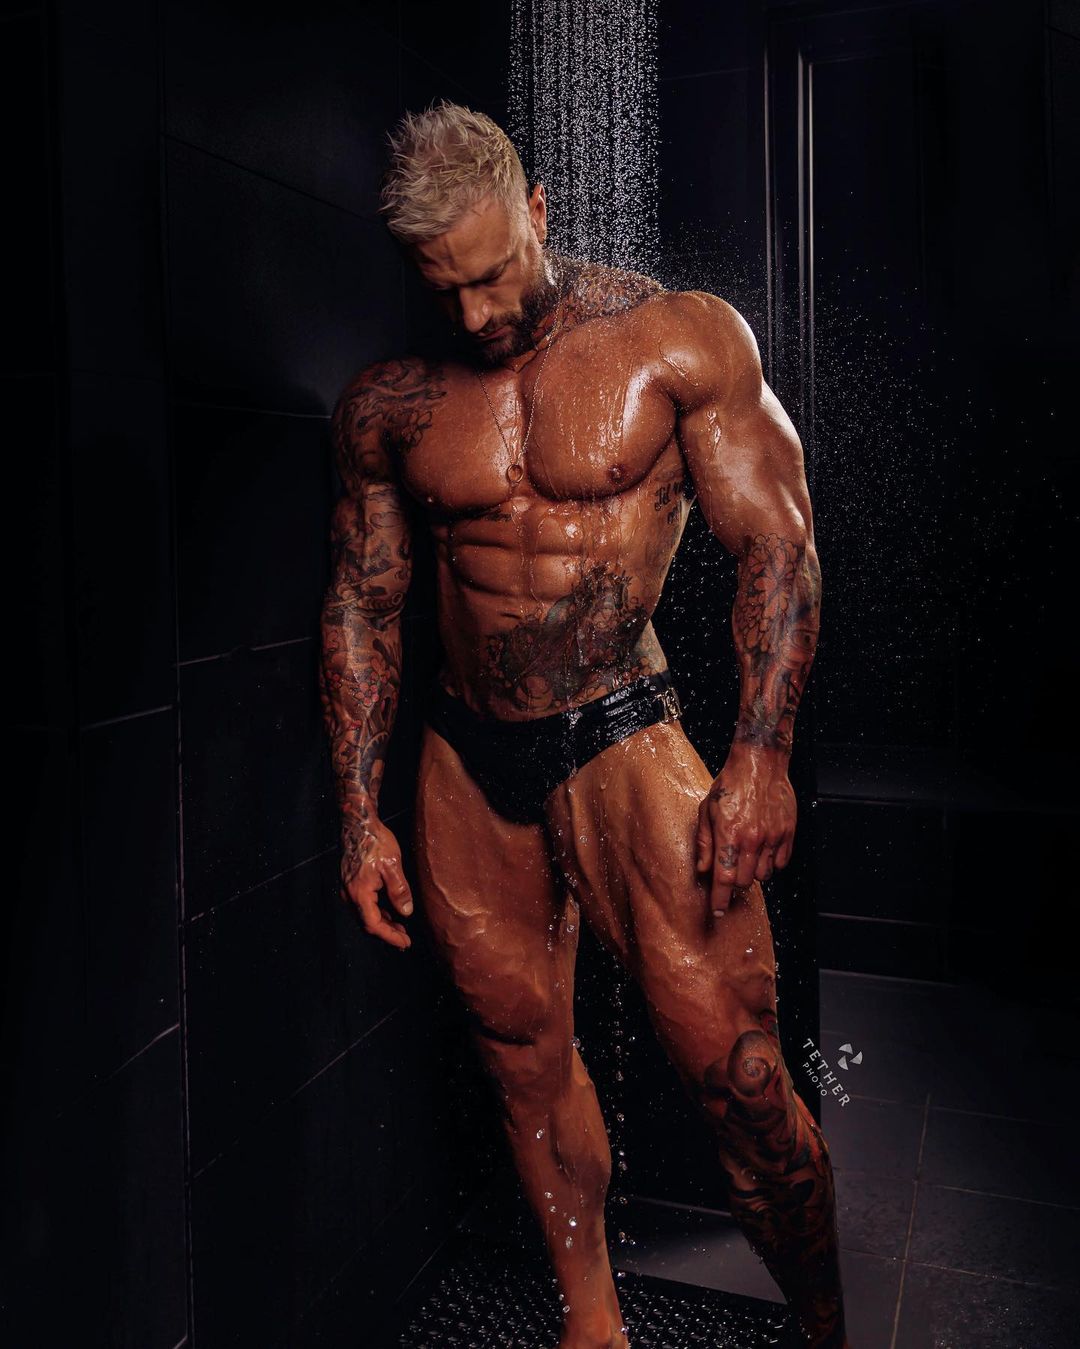 One of the top publications of @chriswebb_wbffpro which has 850 likes and 78 comments